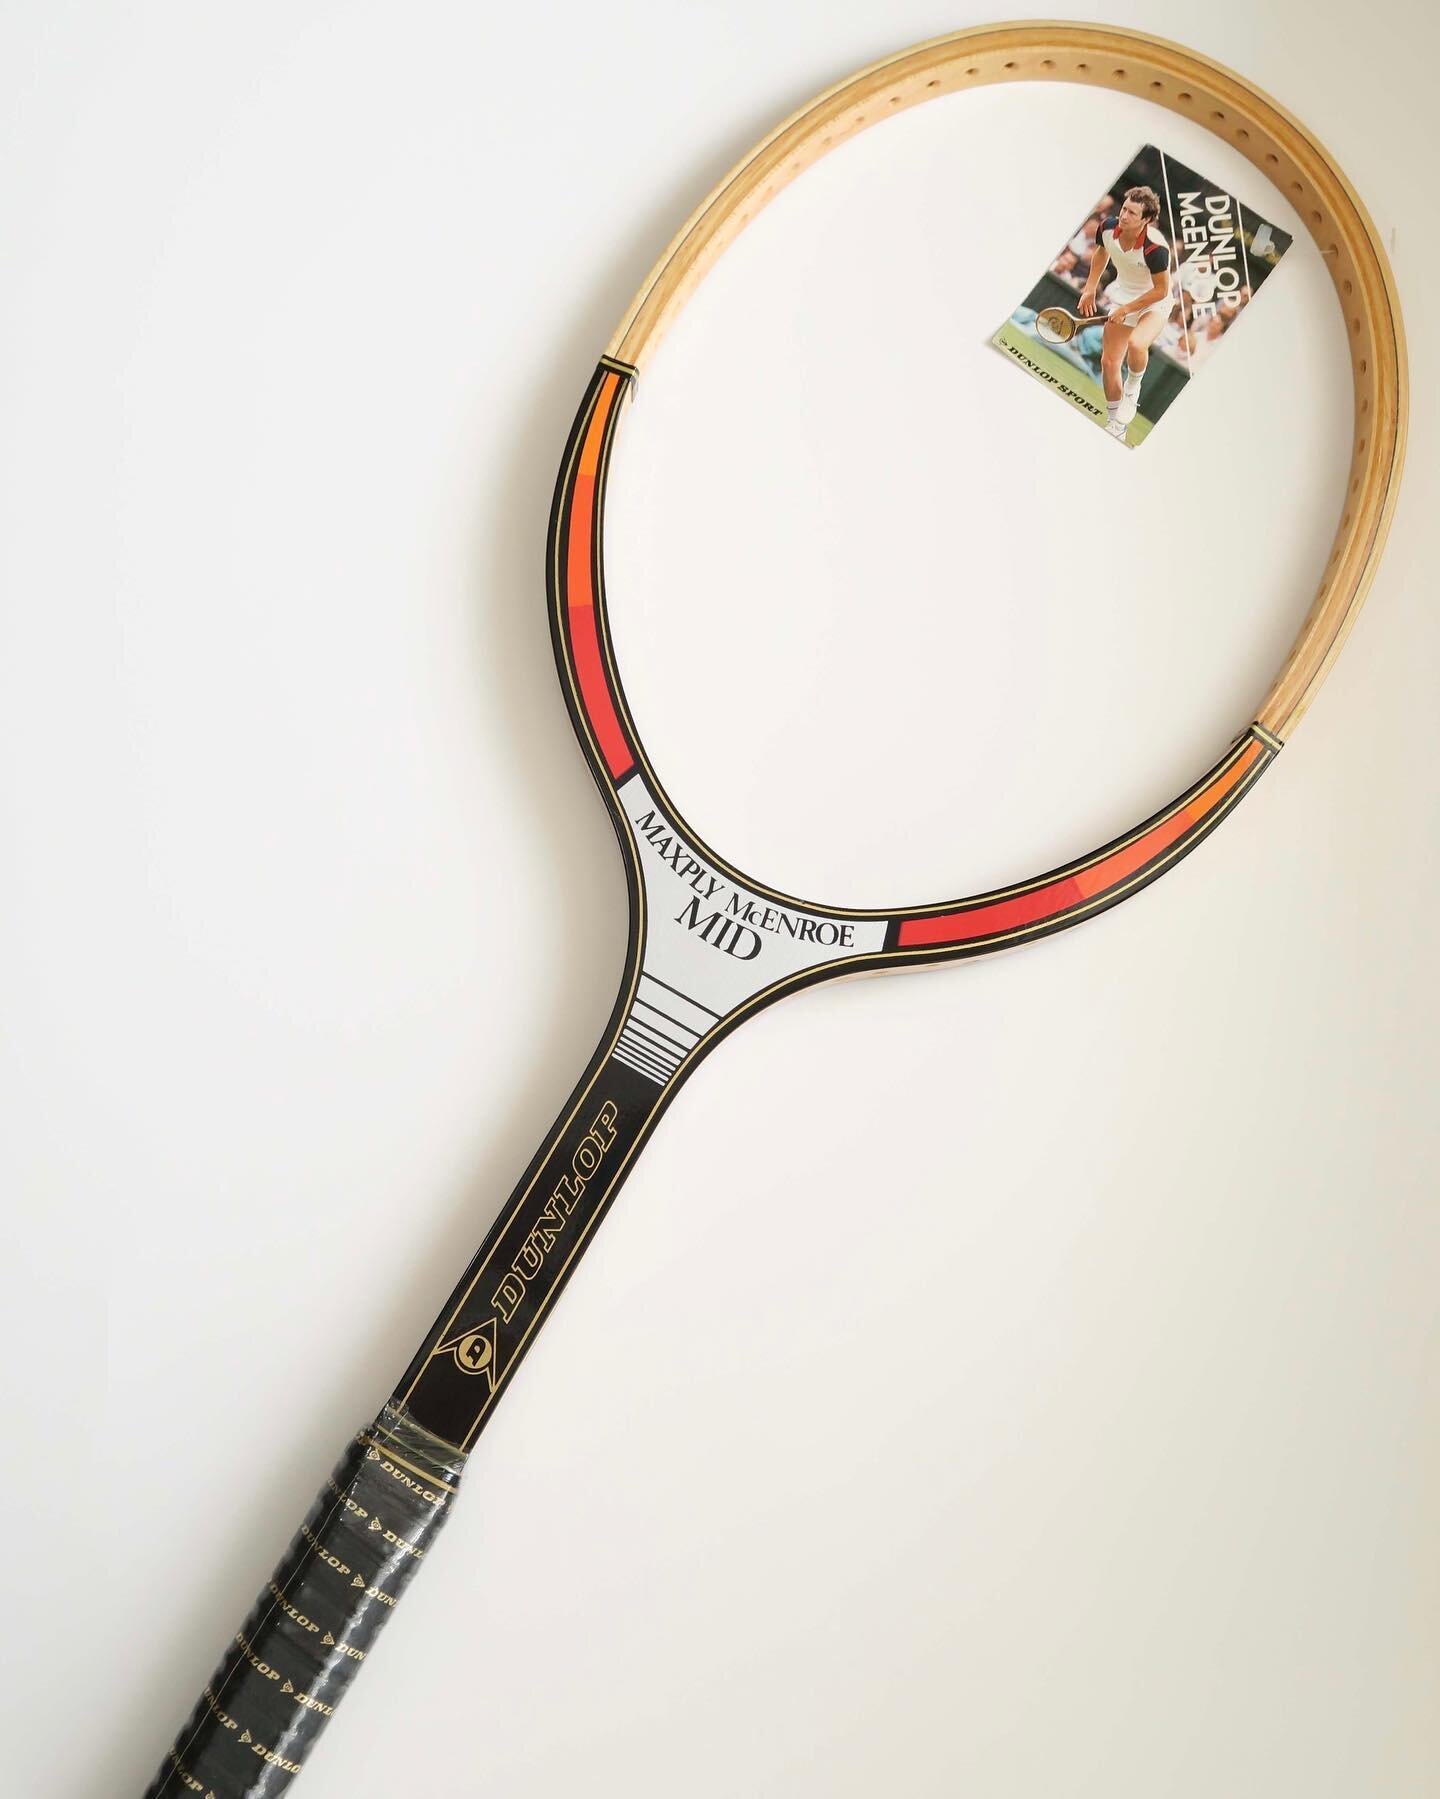 Unleash the allure of vintage tennis with the Dunlop MaxPly McEnroe wooden racquet - a meticulously preserved new old stock gem 💎 Check it out on our site 

#Tennis #tennisplayer #tennislife #tenniscourt #tennisball #racquetstringing #tennistoronto 